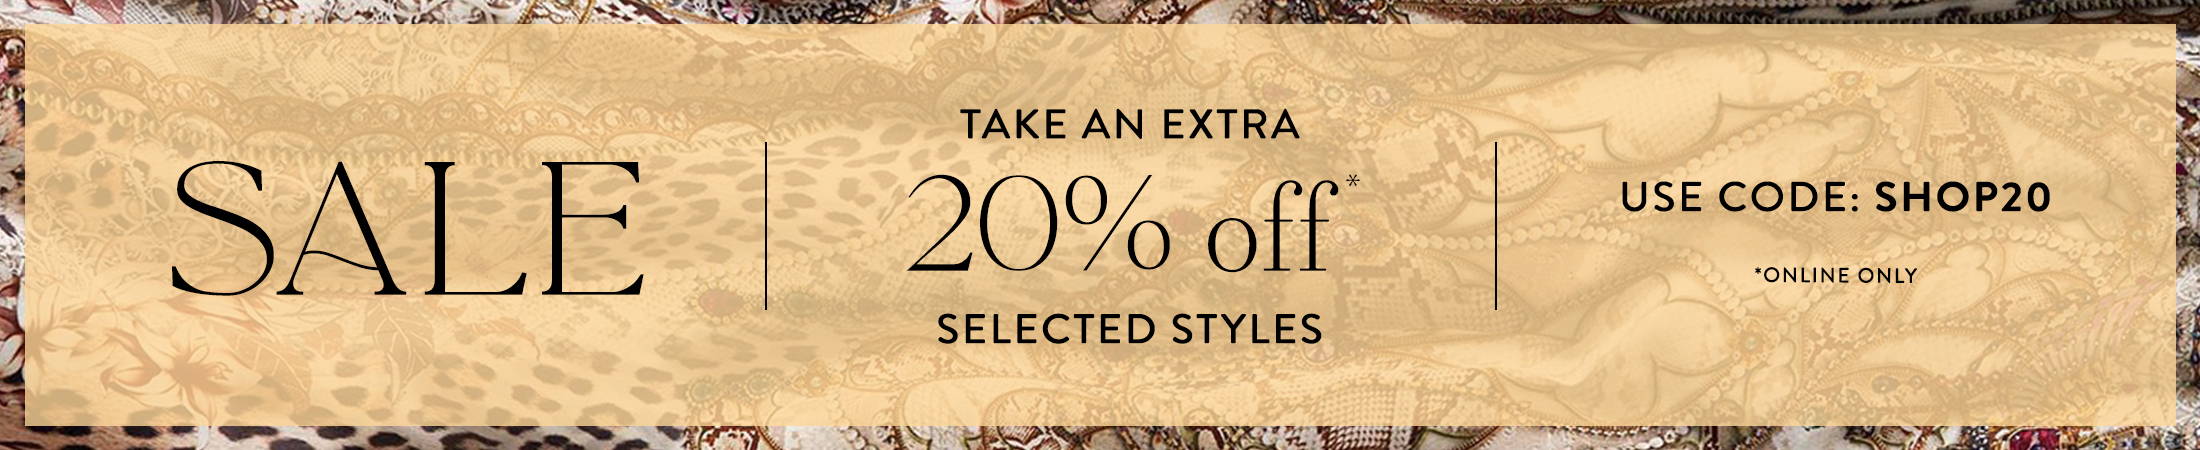 CAMILLA SALE | take an extra 20% off selected styles | use code SHOP20